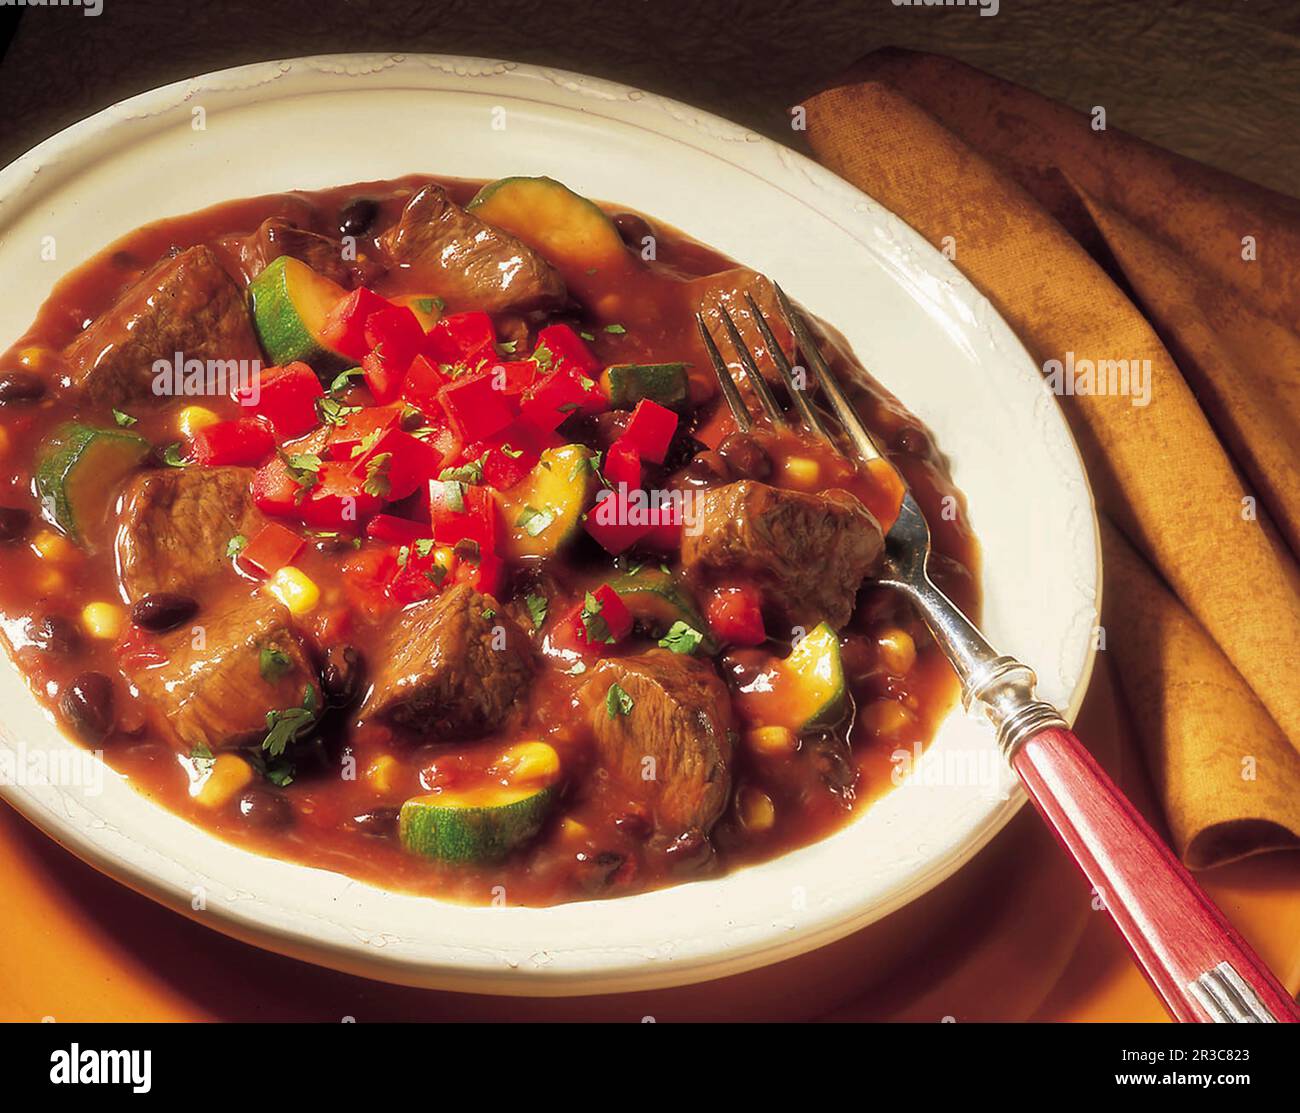 A bowl of Mexican style beef stew with a fork and golden napkin Stock Photo